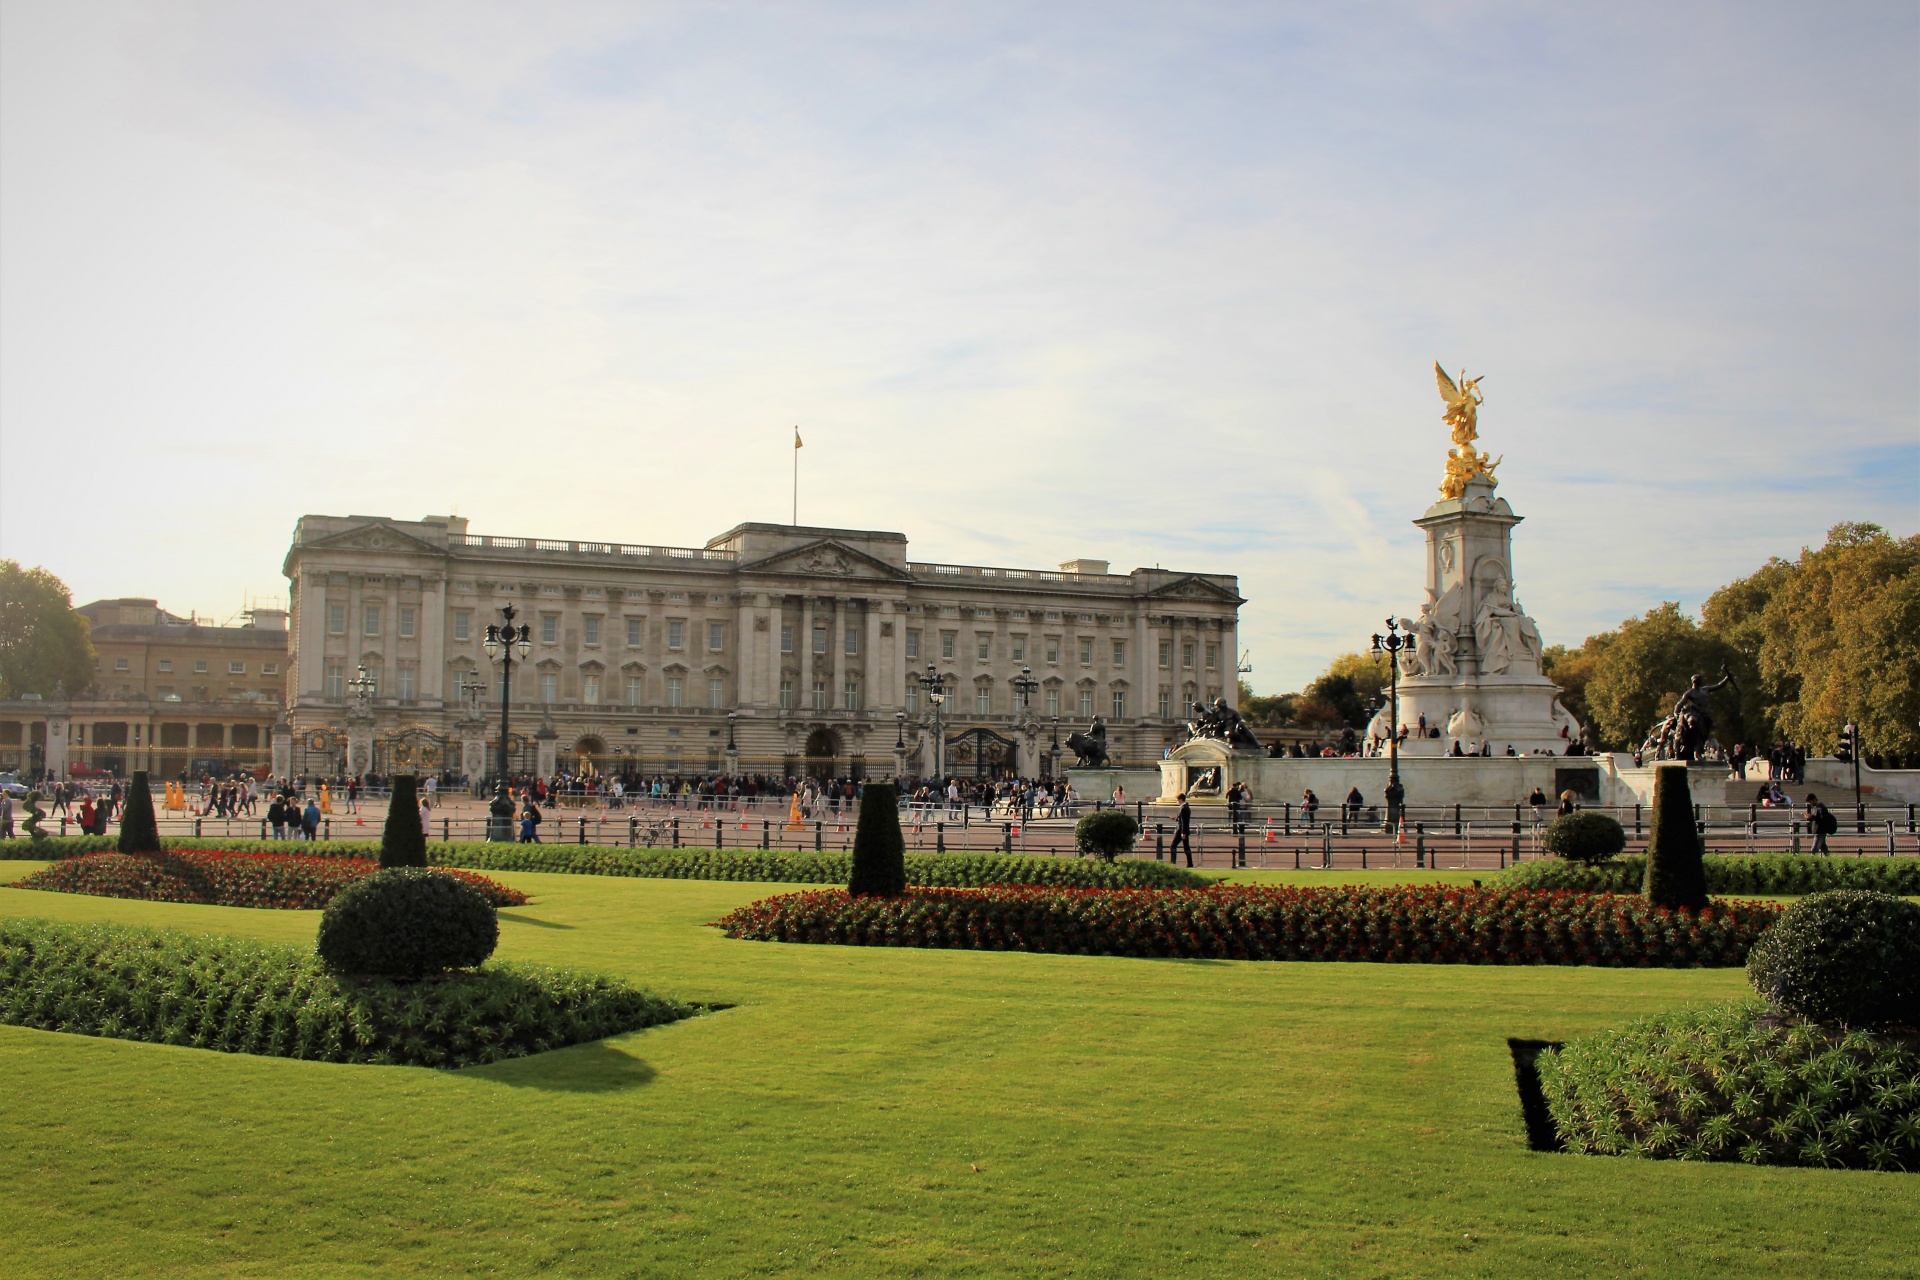 Buckingham Palace in London and the victoria memorial